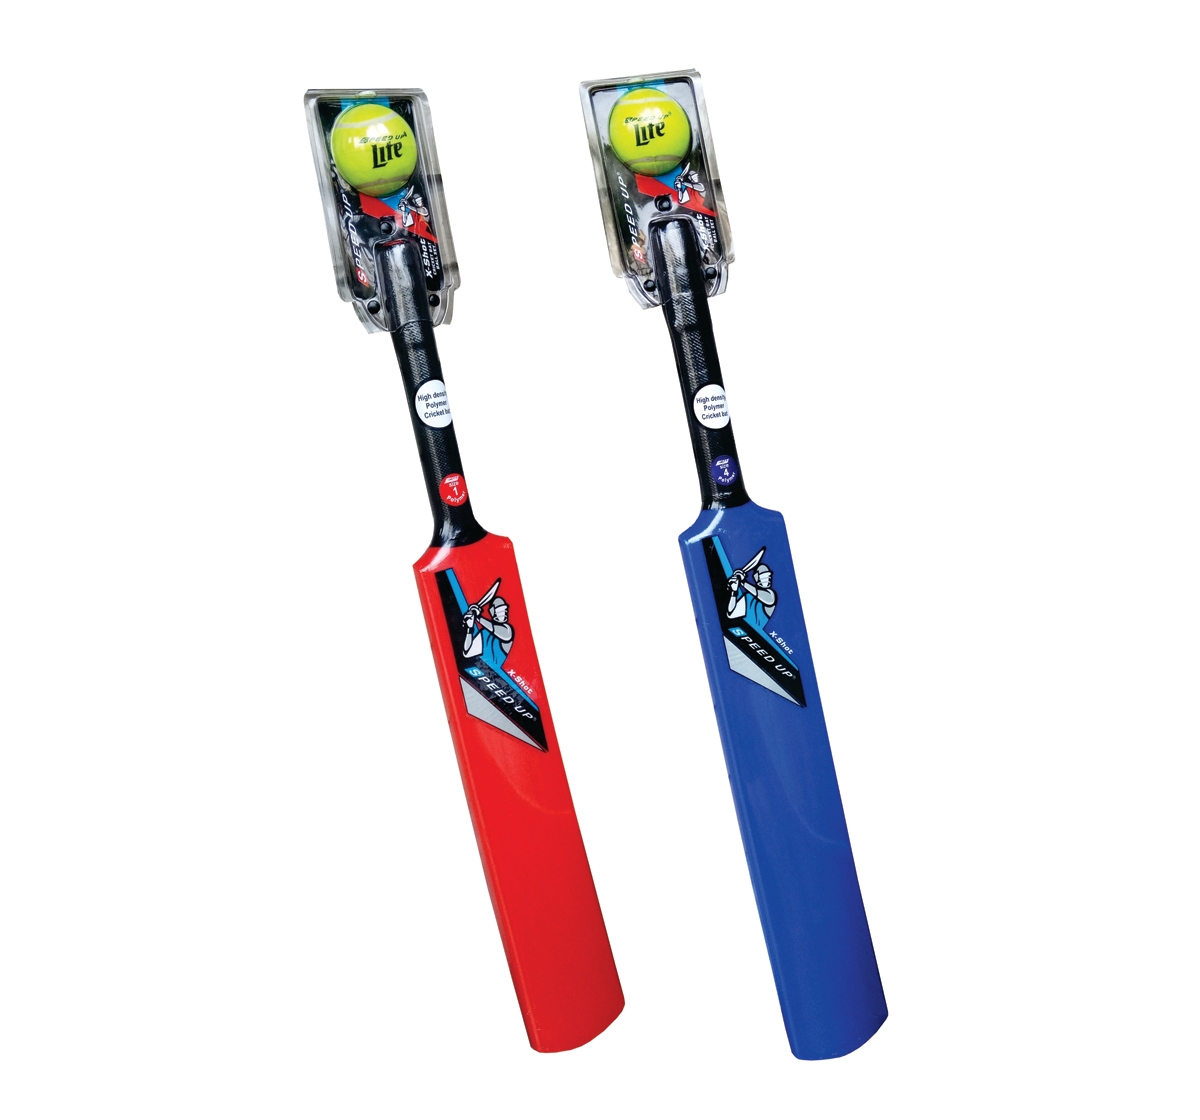 Speed Up | Speed Up Reinforced Polymer Bat And Ball Size 5 Kids Toy Multicolour 8Y+